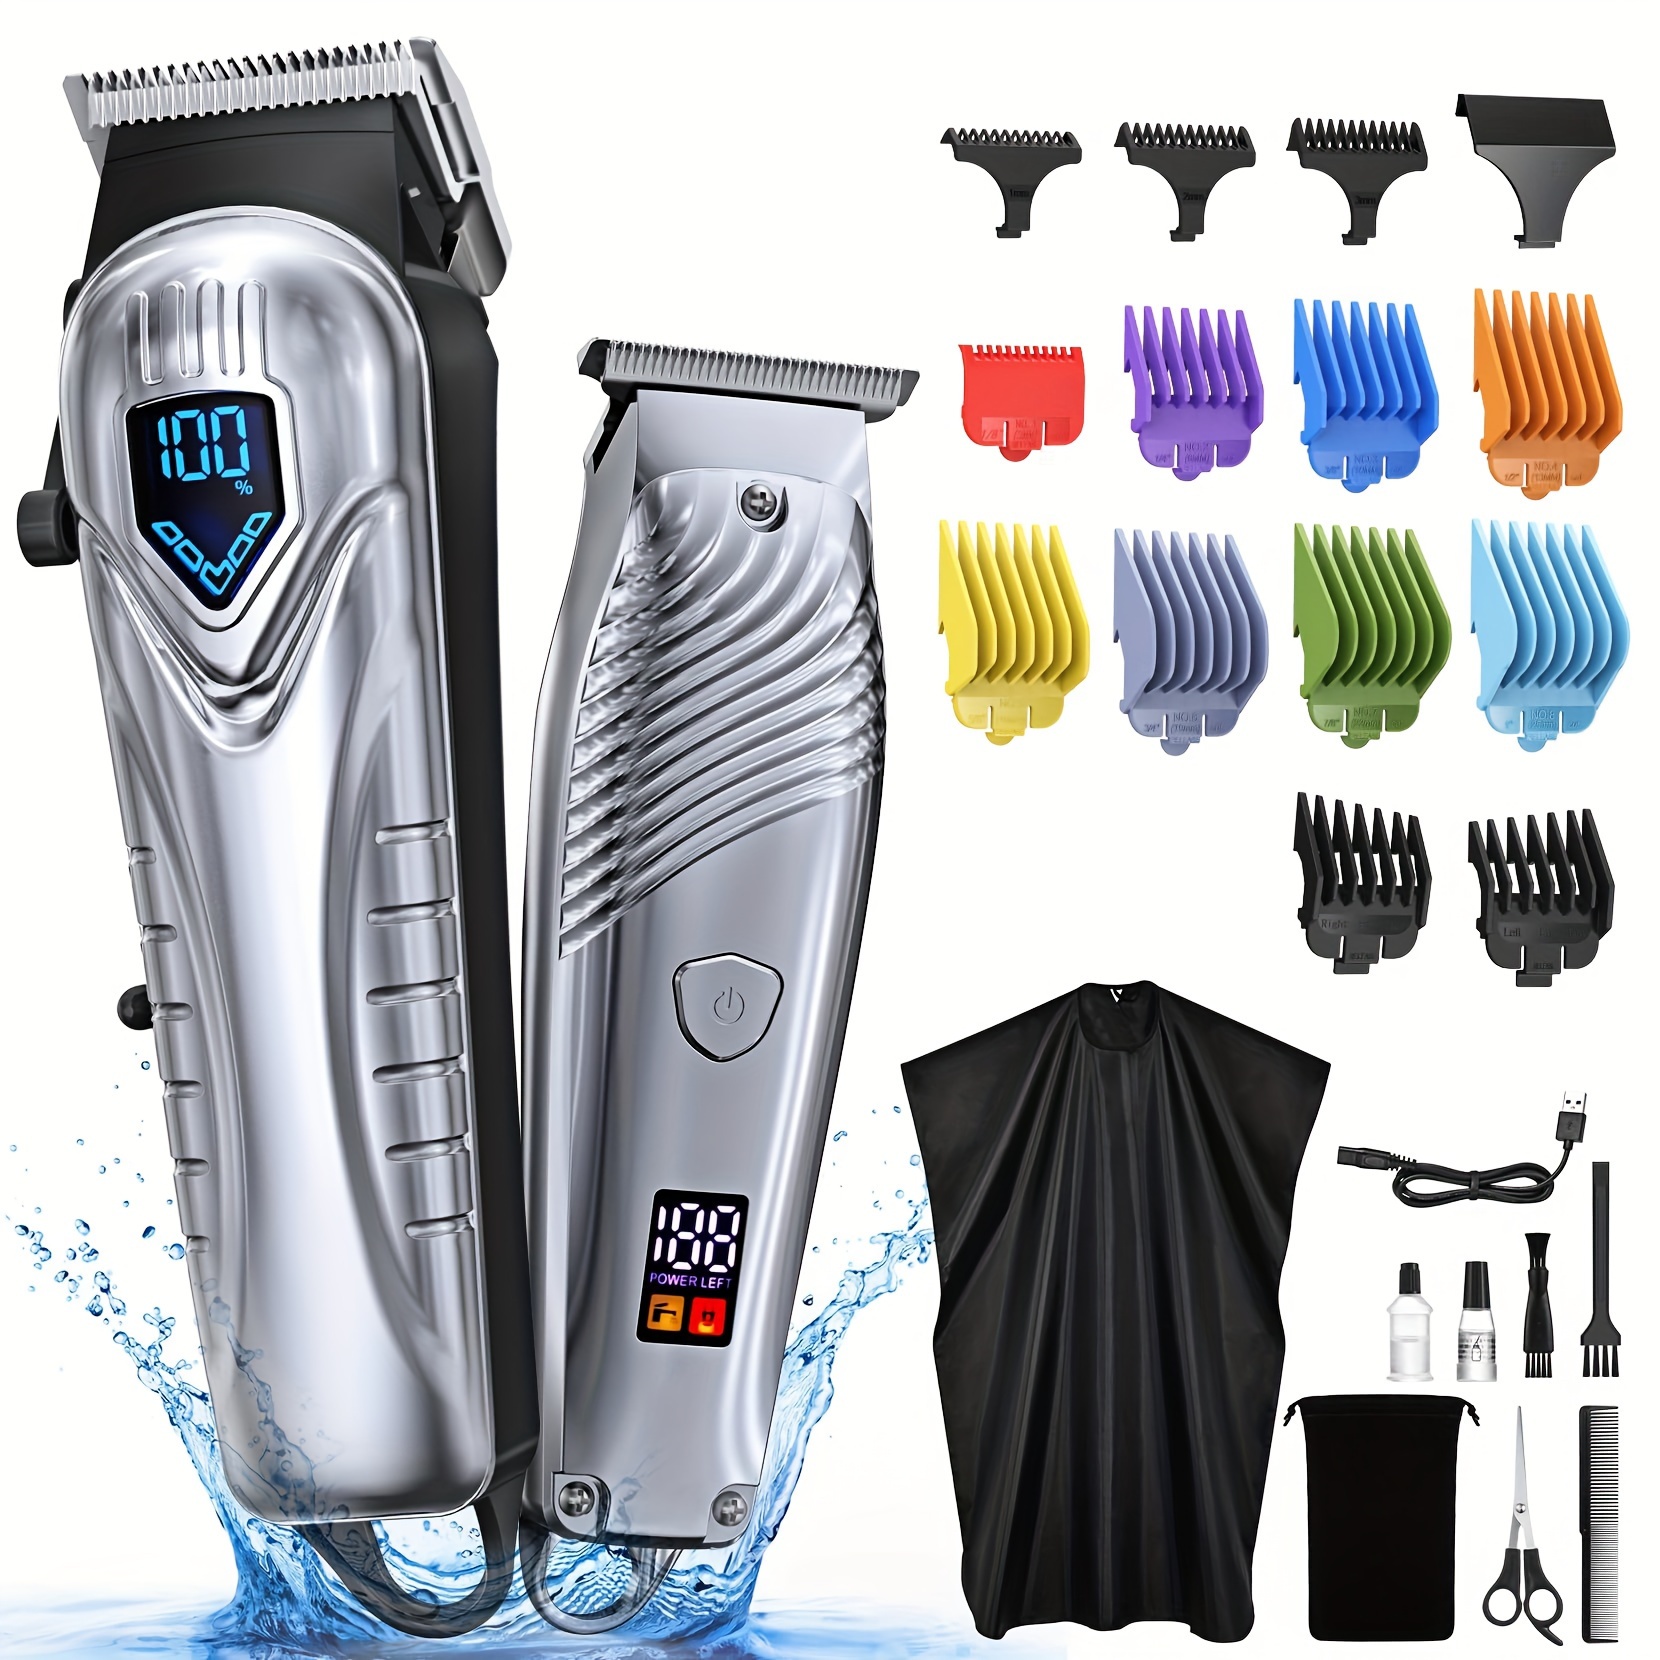 

Hair Clippers For Men&women, 5 Hours Cordless Hair Cutting Kit With 10 Combs, Led Display, Low Noise Professional Beard Trimmer Barber Clippers Hair Cutting Kit With Scissors, Cape